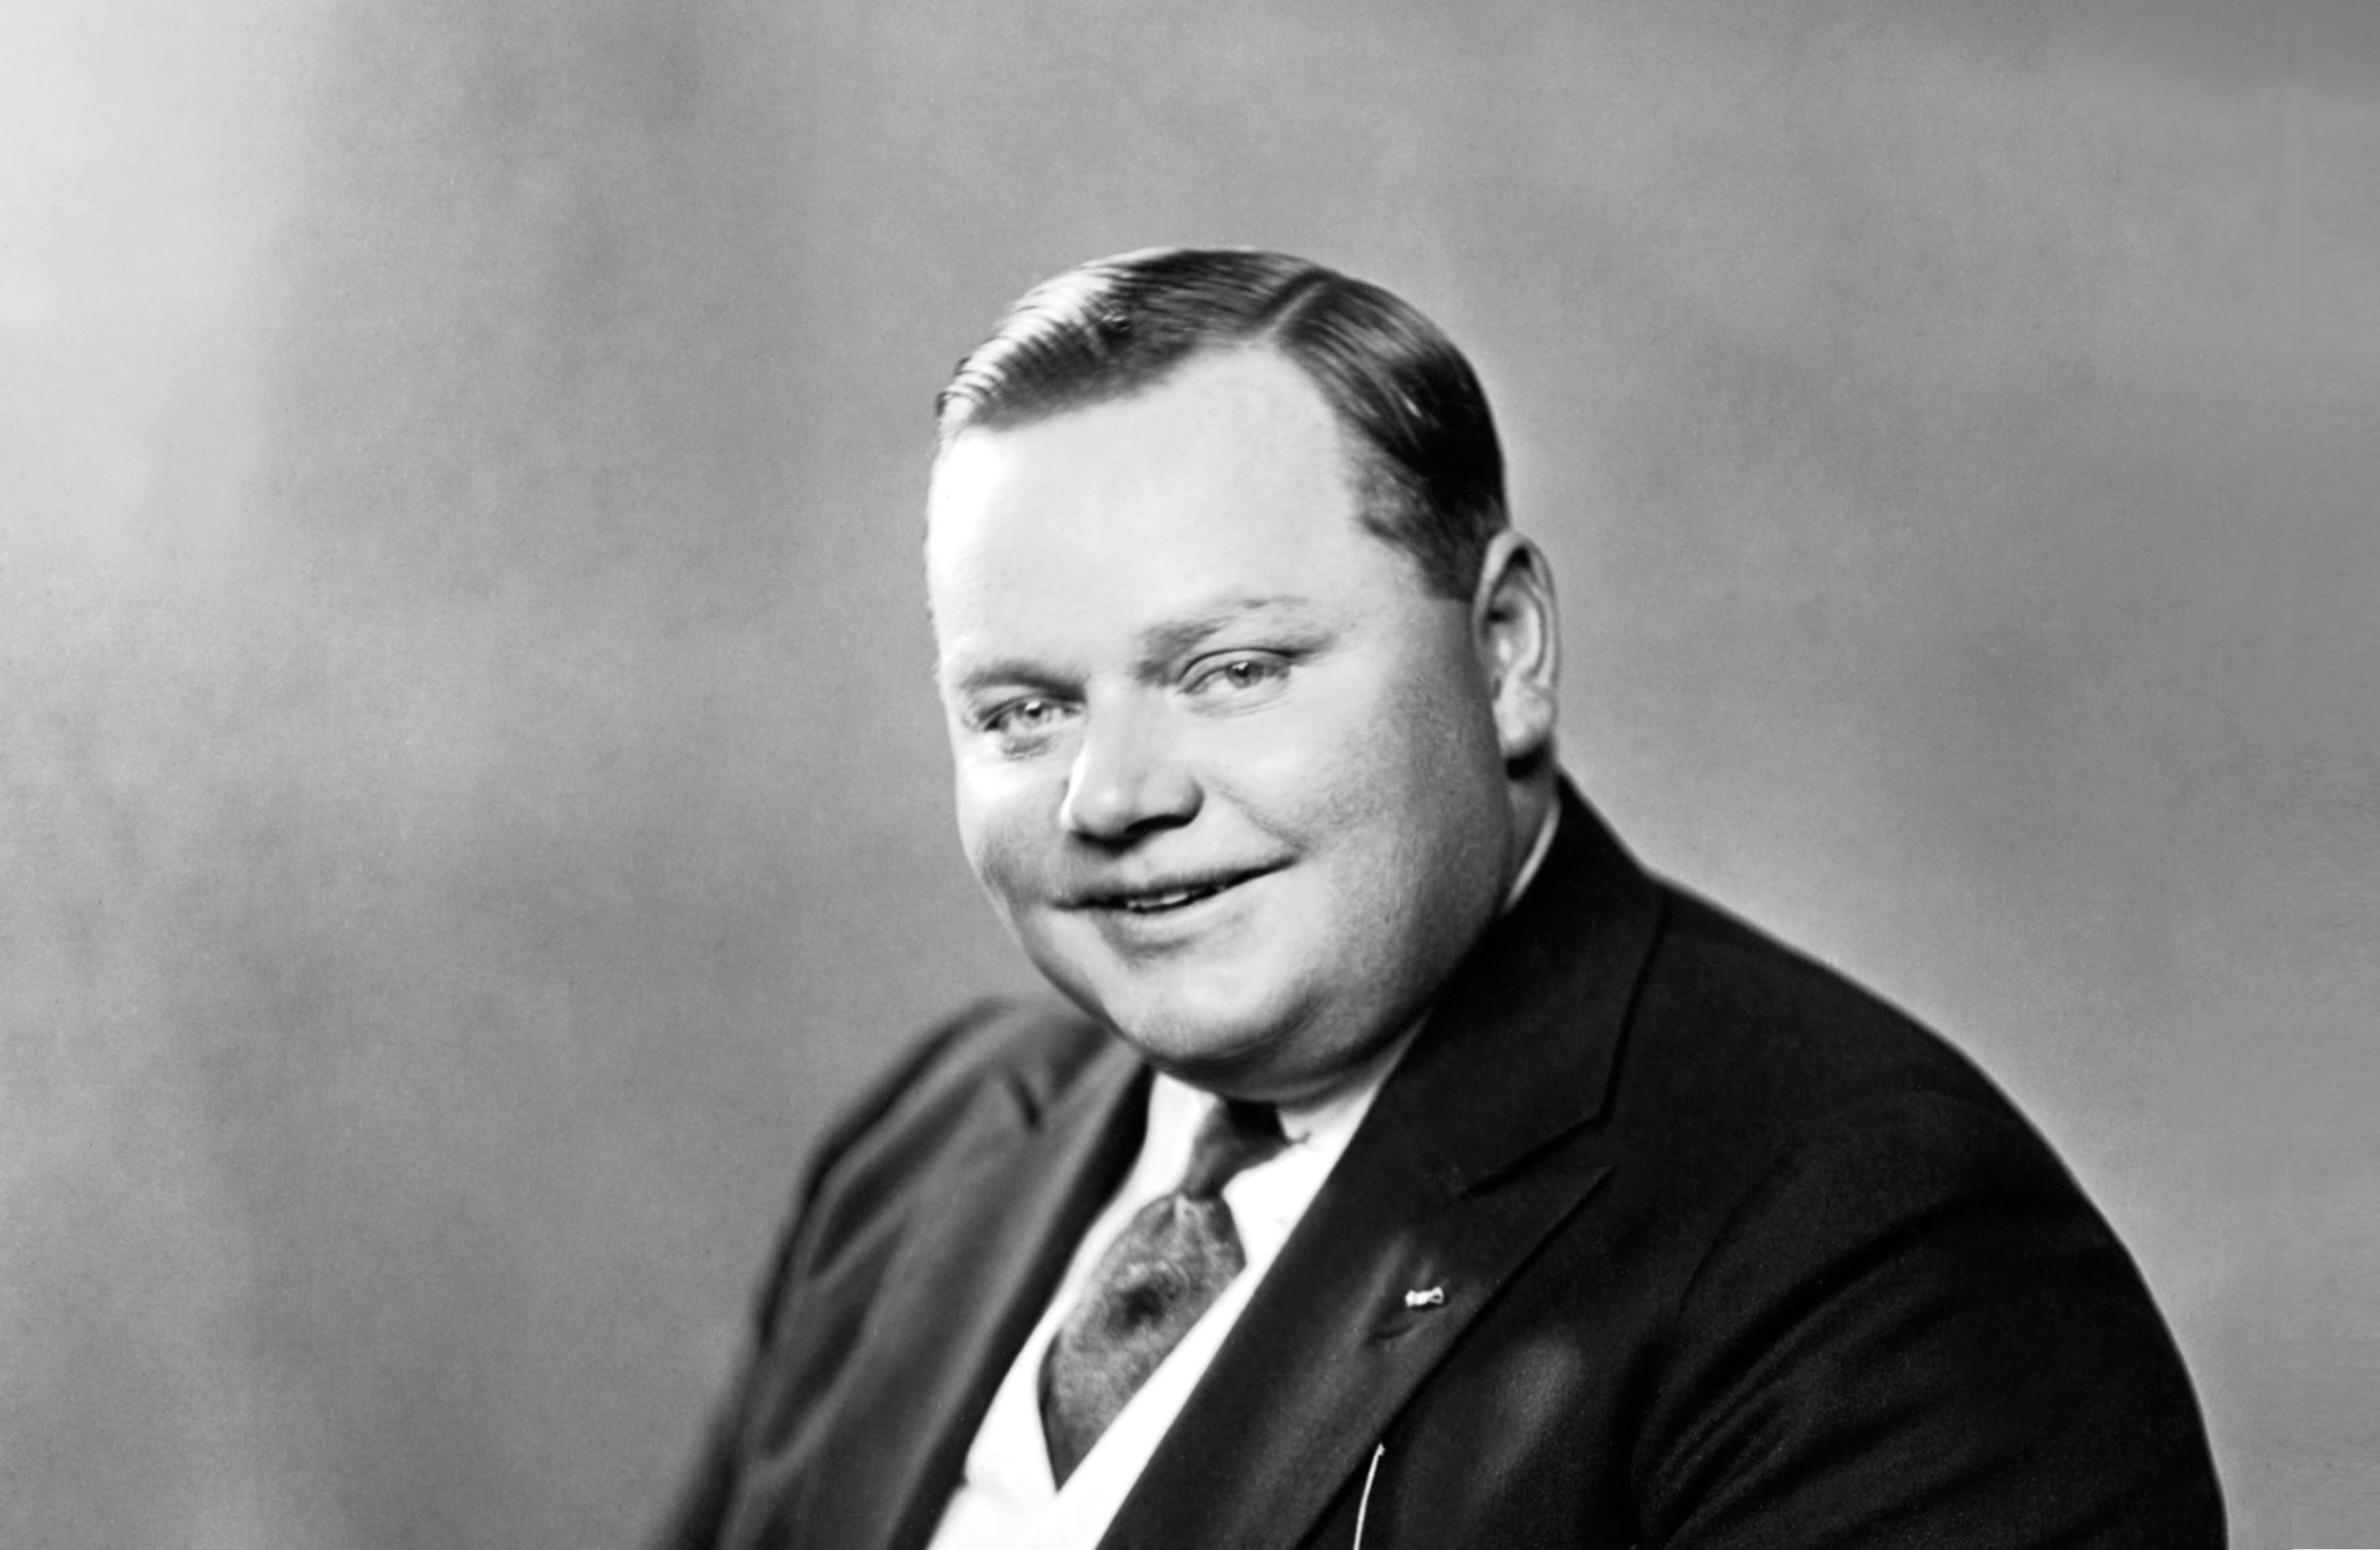 Fatty Arbuckle. He was a comedian from like the 1930s or 40s that he got accused of r*ping an actress. In truth, she had like an overdose and had a bunch of health problems due to backalley abortions; even though he was proven innocent, his career never recovered from this. -MisterVictor13